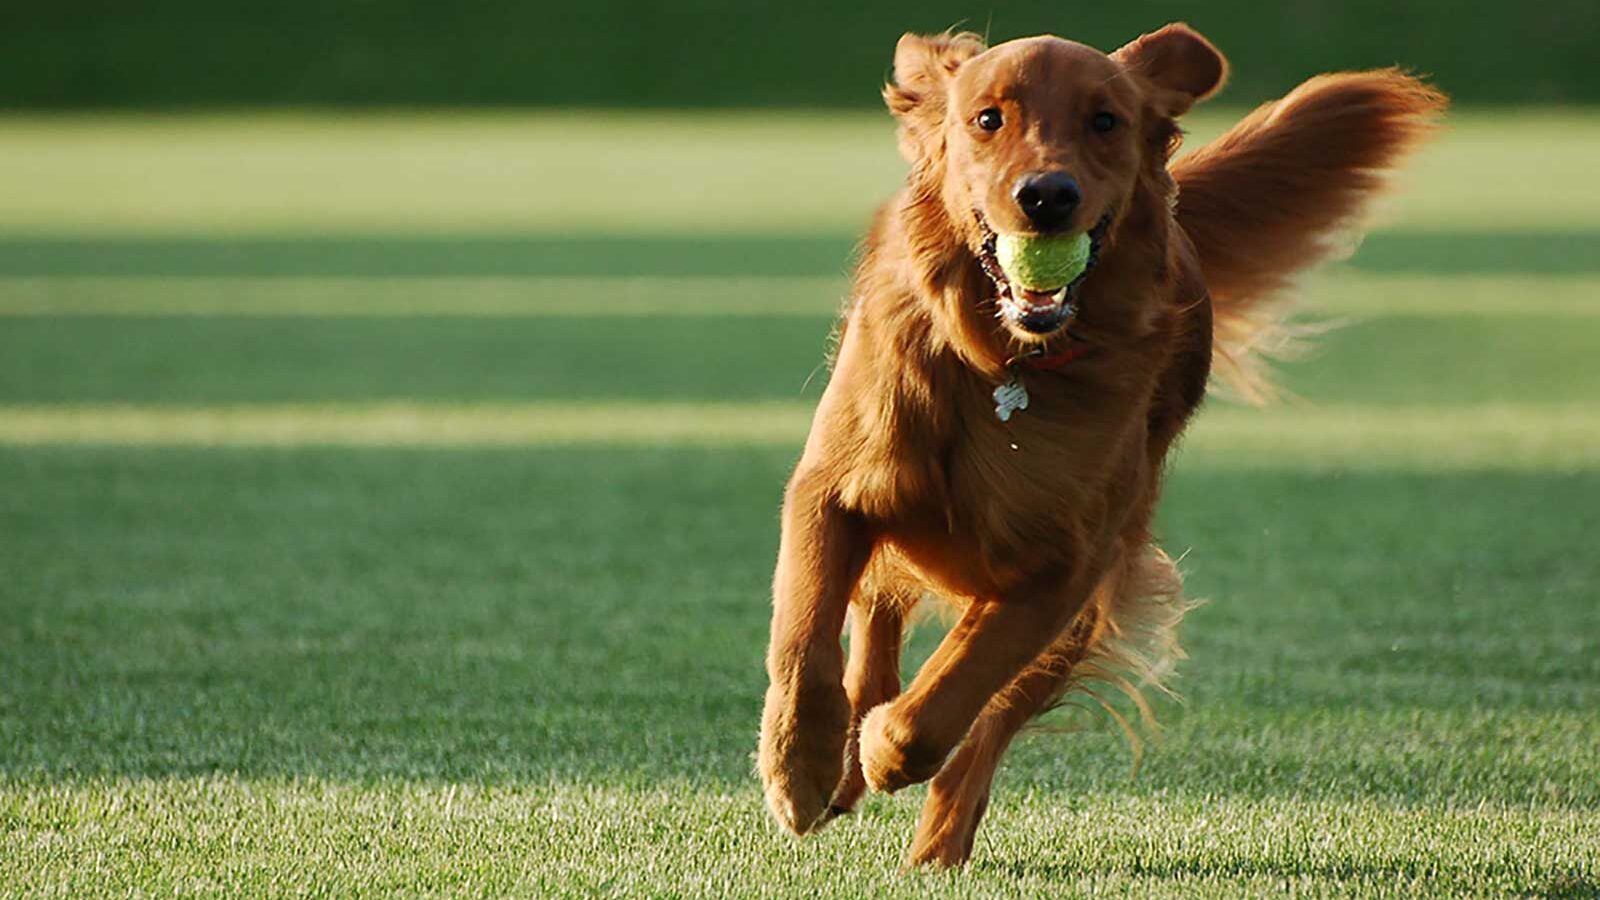 Dog control areas review - dog running on grass with ball in its mouth.